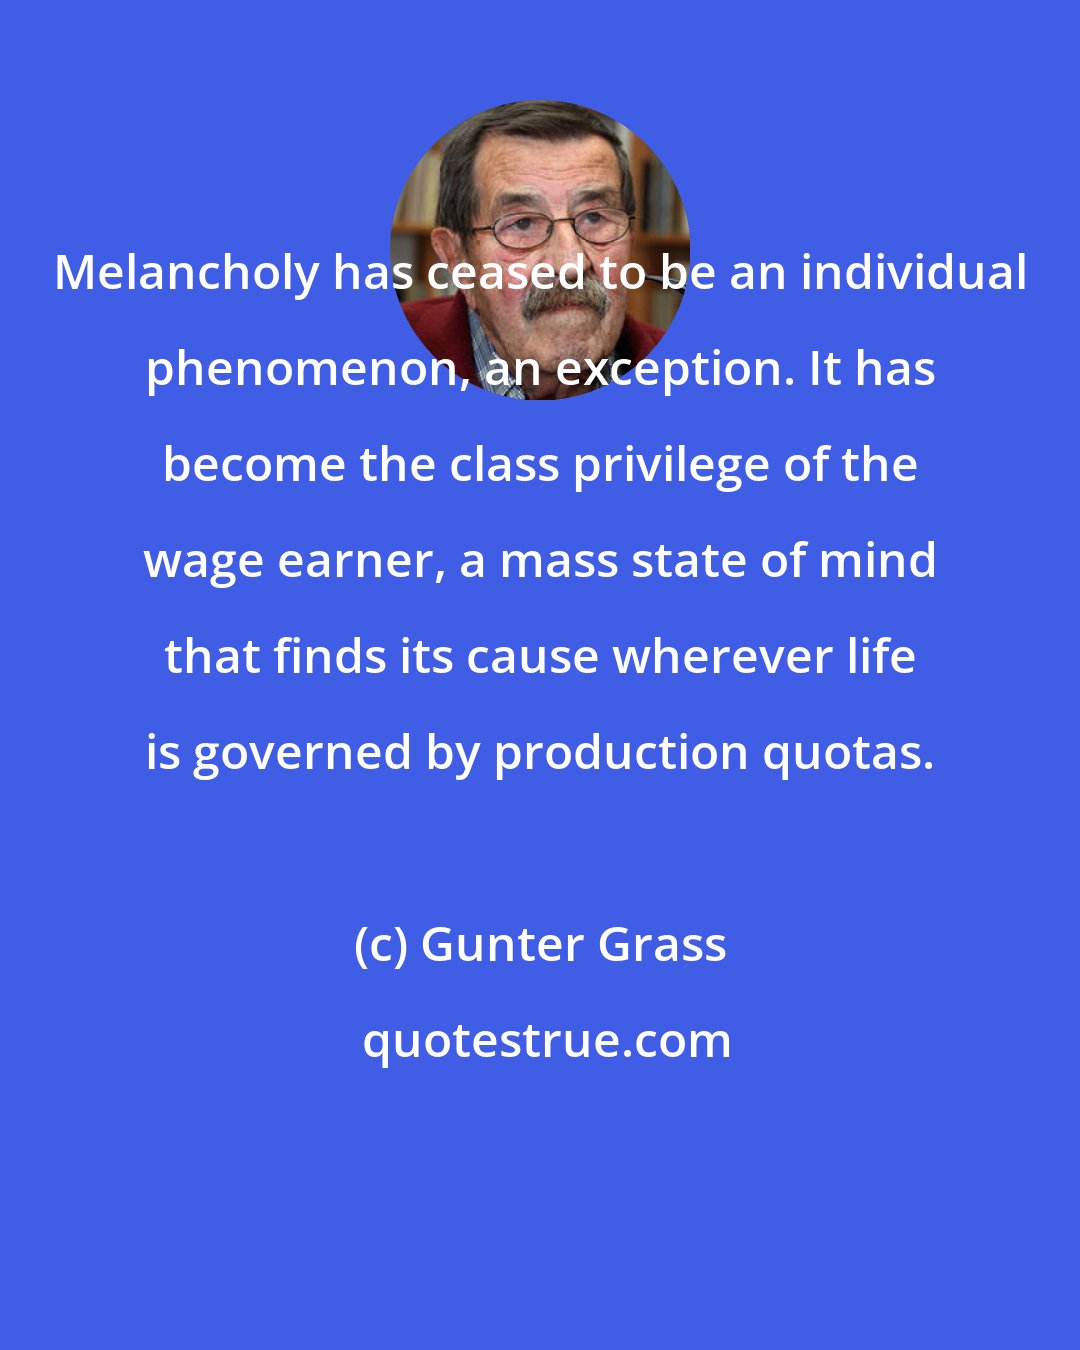 Gunter Grass: Melancholy has ceased to be an individual phenomenon, an exception. It has become the class privilege of the wage earner, a mass state of mind that finds its cause wherever life is governed by production quotas.